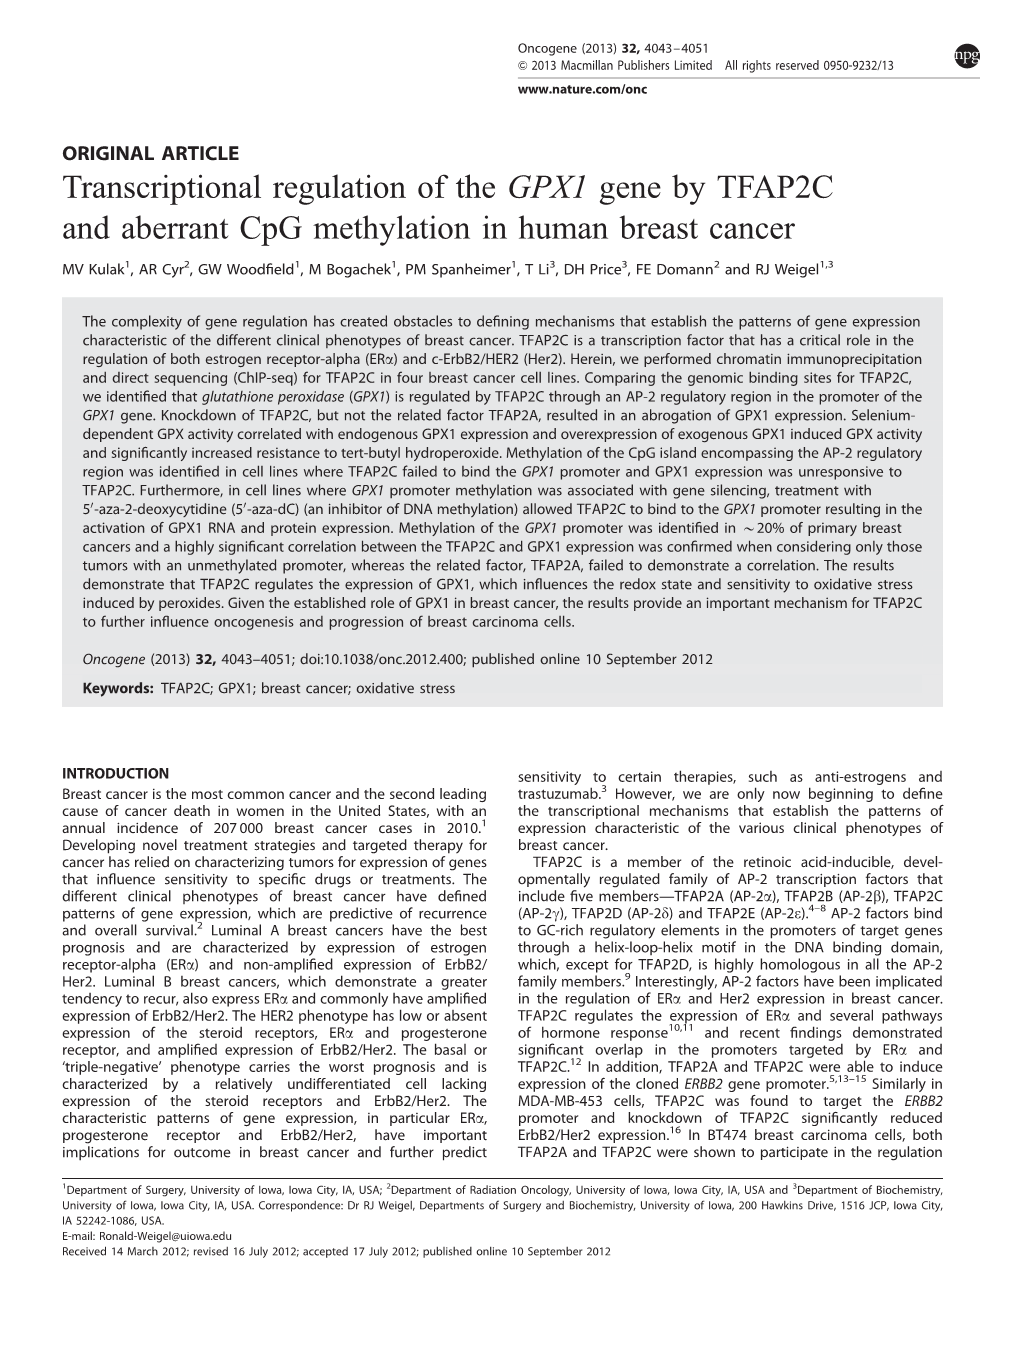 Transcriptional Regulation of the GPX1 Gene by TFAP2C and Aberrant Cpg Methylation in Human Breast Cancer